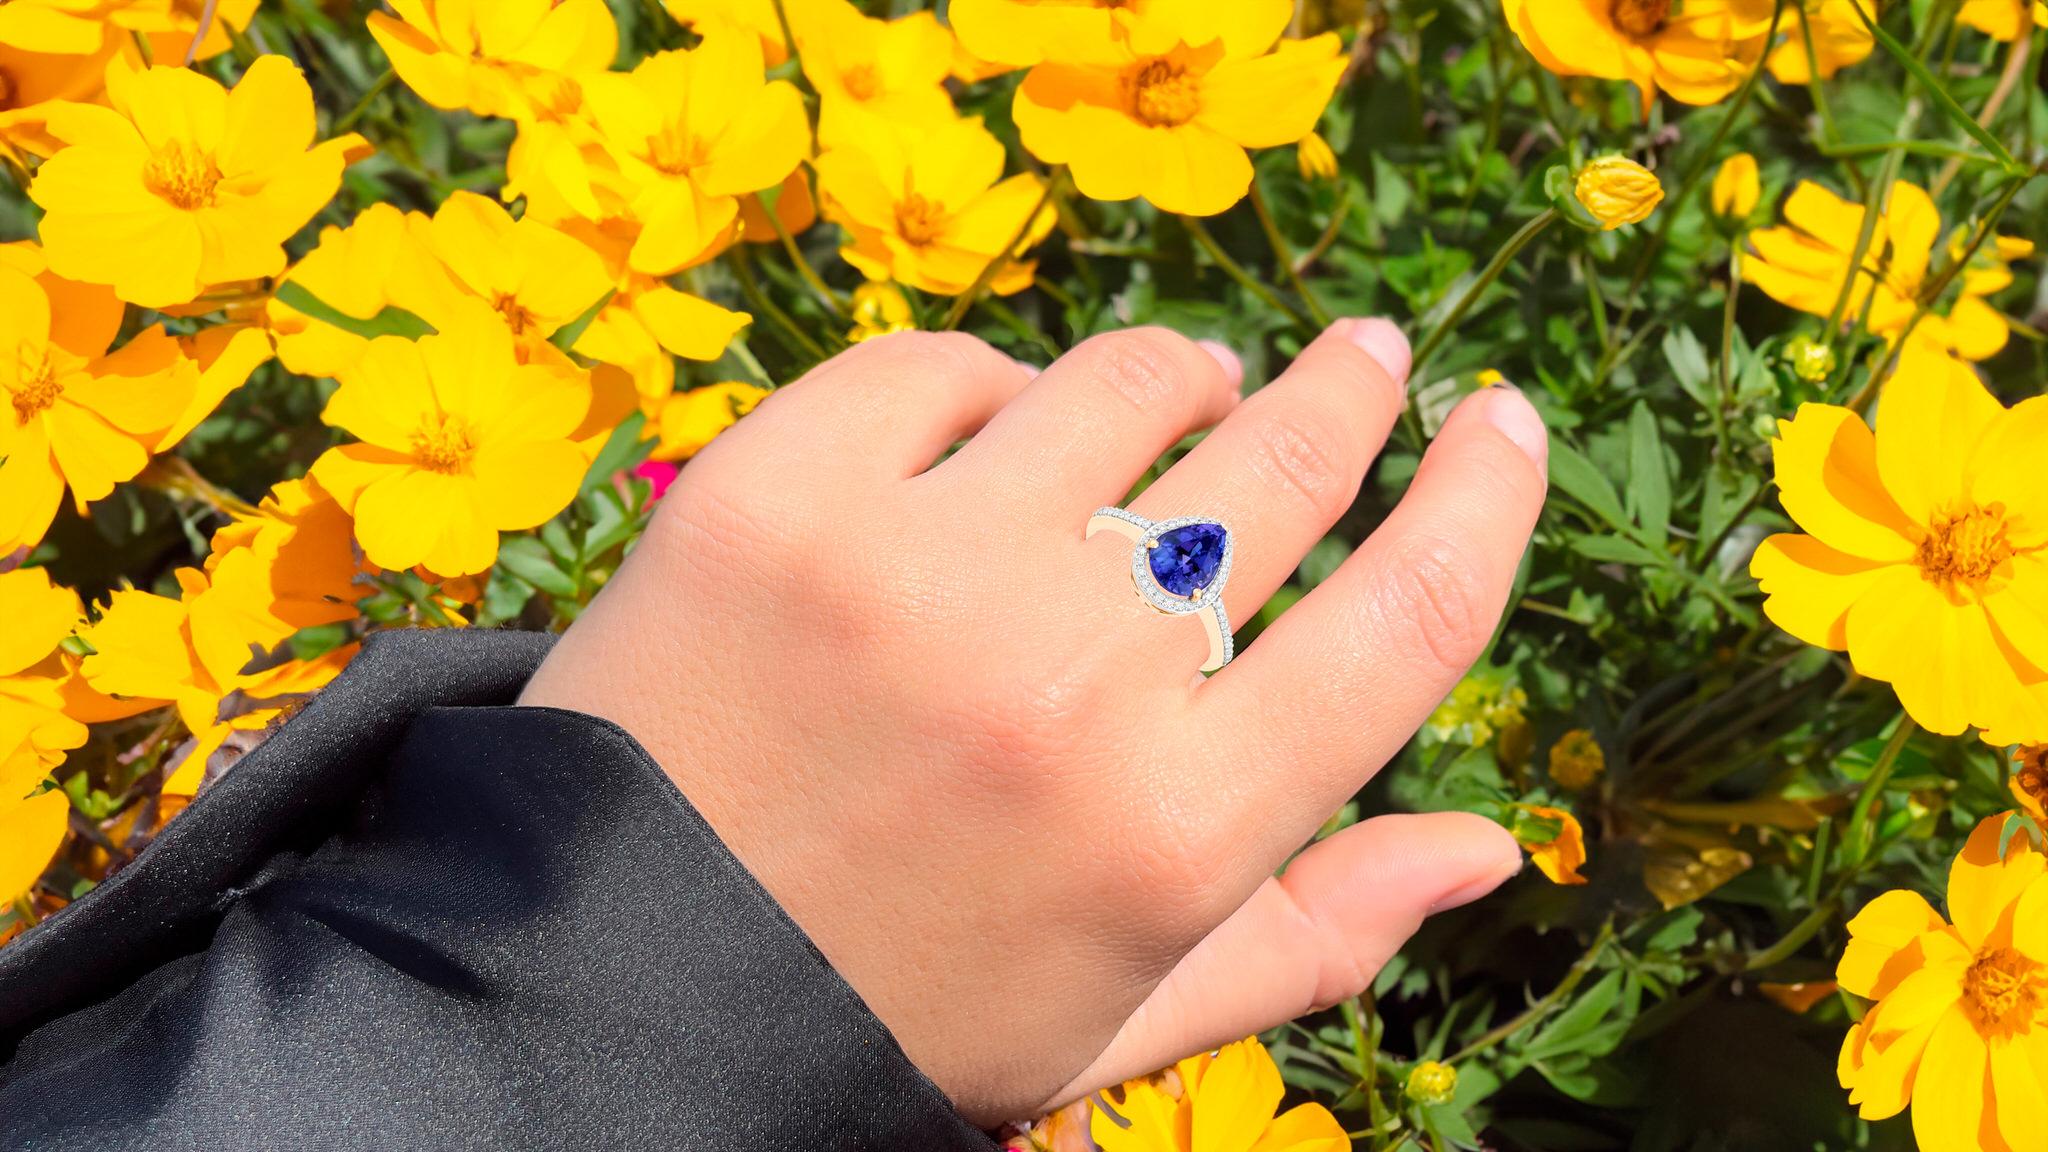 Pear Cut Tanzanite Ring With Diamonds 2.39 Carats 14K Yellow Gold For Sale